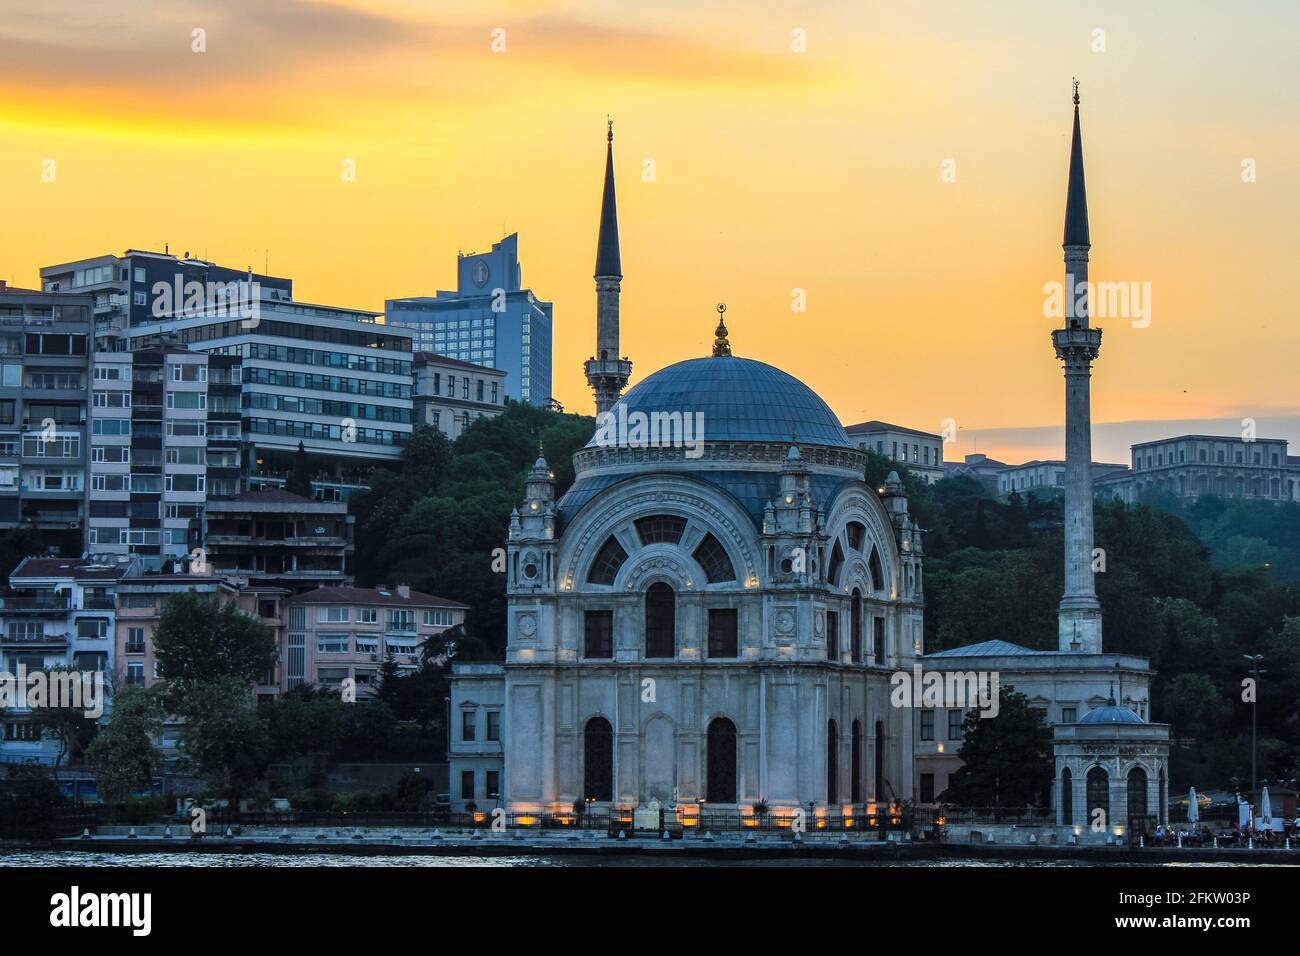 Istanbul, Turkey - May 12, 2013: View of Dolmabahce Mosque on the Waterfront at Sunset Stock Photo